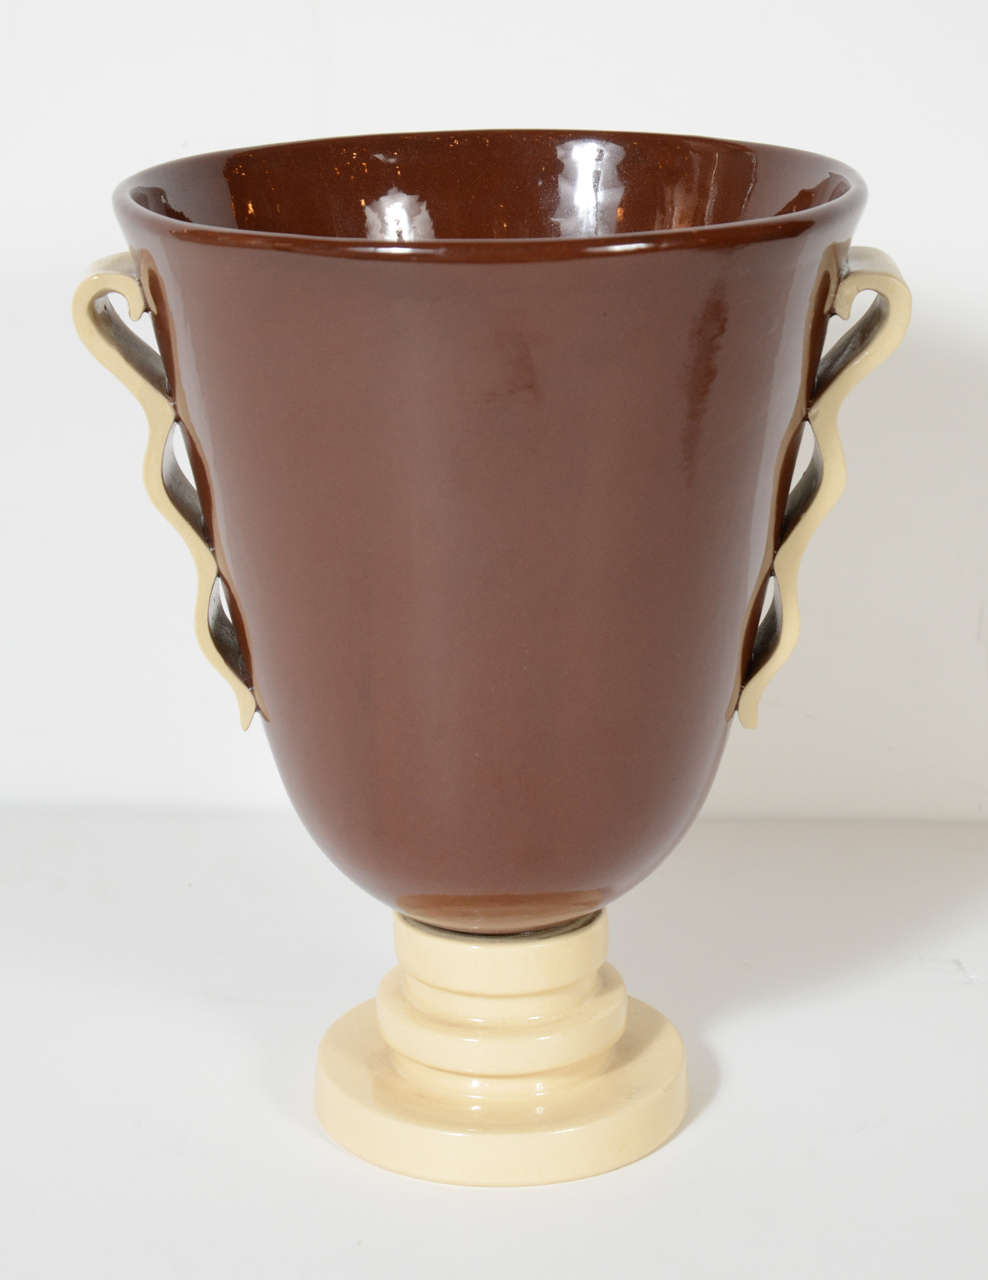 This gorgeous Art Deco urn shaped vase features a chocolate and cream glazed finish. It has a series of concentric circles forming the base and beautifully detailed handles. This piece is signed by Boch Ferre.